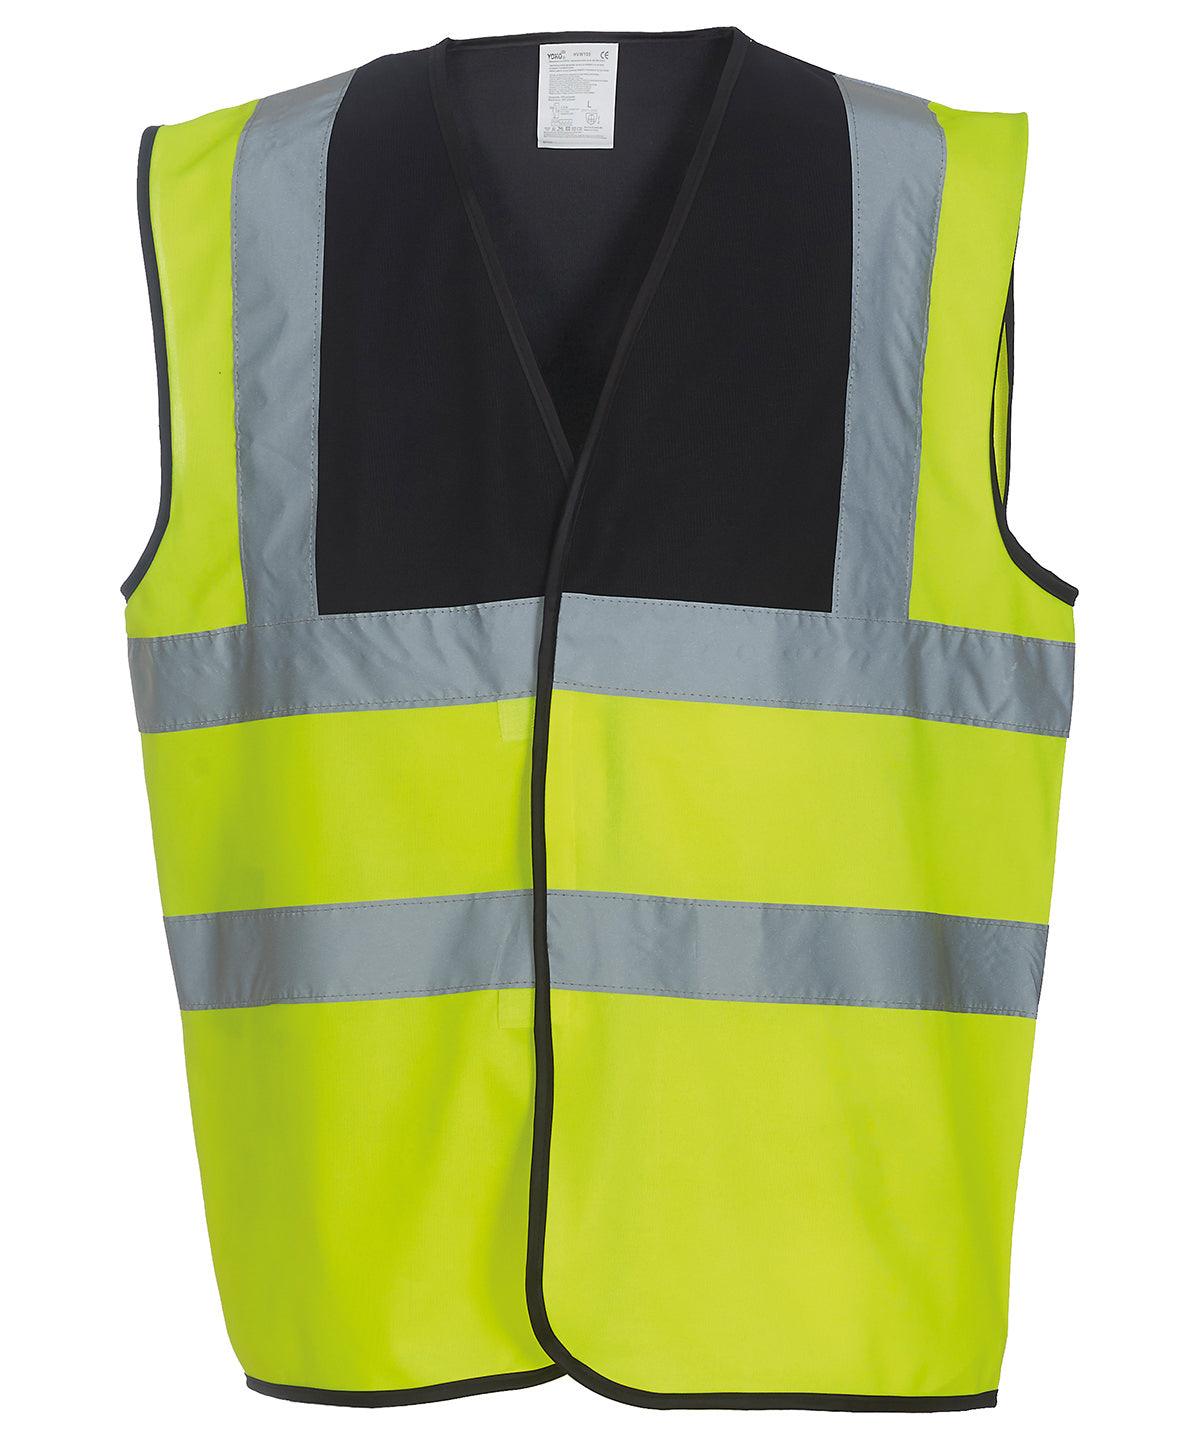 Black Yoke/Yellow - Hi-vis 2-band-and-braces waistcoat (HVW100) Safety Vests Yoko Must Haves, Personal Protection, Plus Sizes, Safety Essentials, Safetywear, Workwear Schoolwear Centres